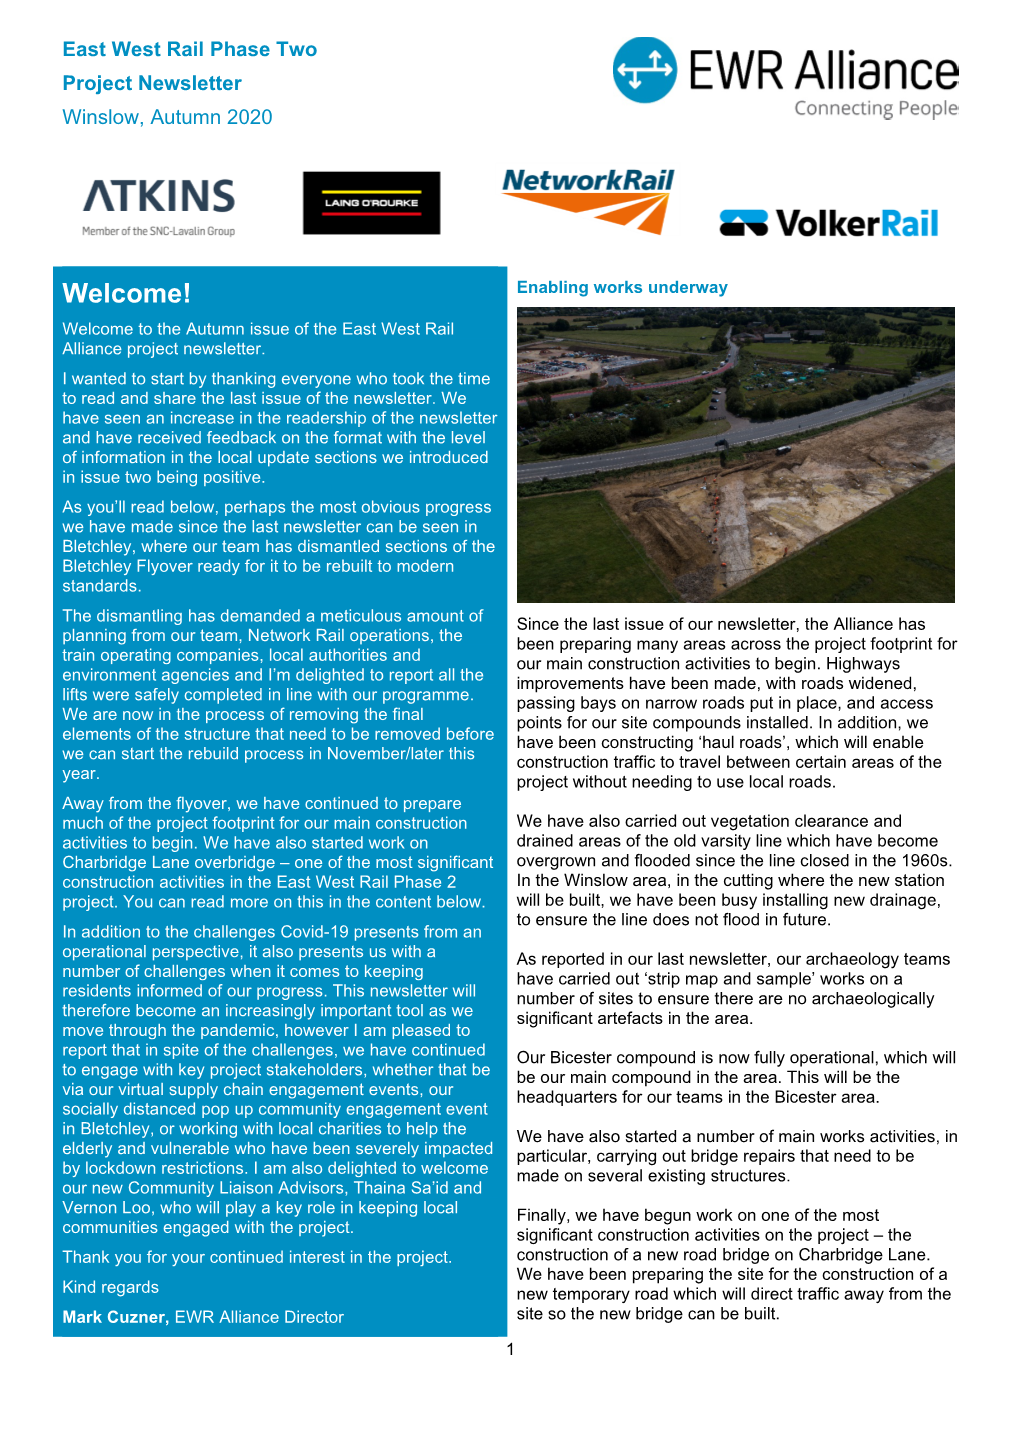 Winslow East West Rail Phase 2 Newsletter